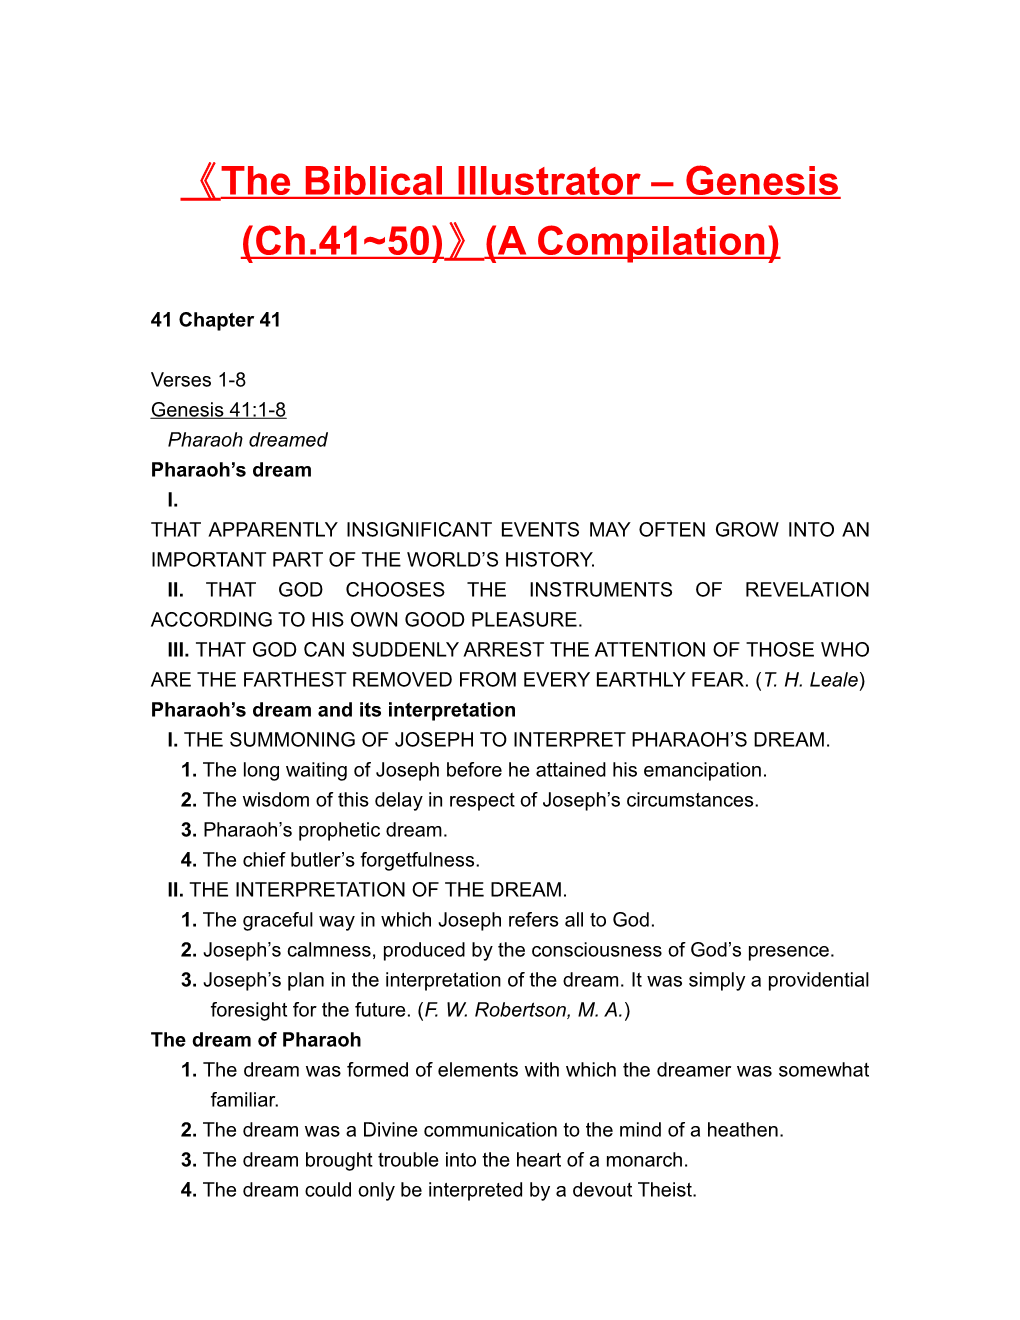 The Biblical Illustrator Genesis (Ch.41 50) (A Compilation)